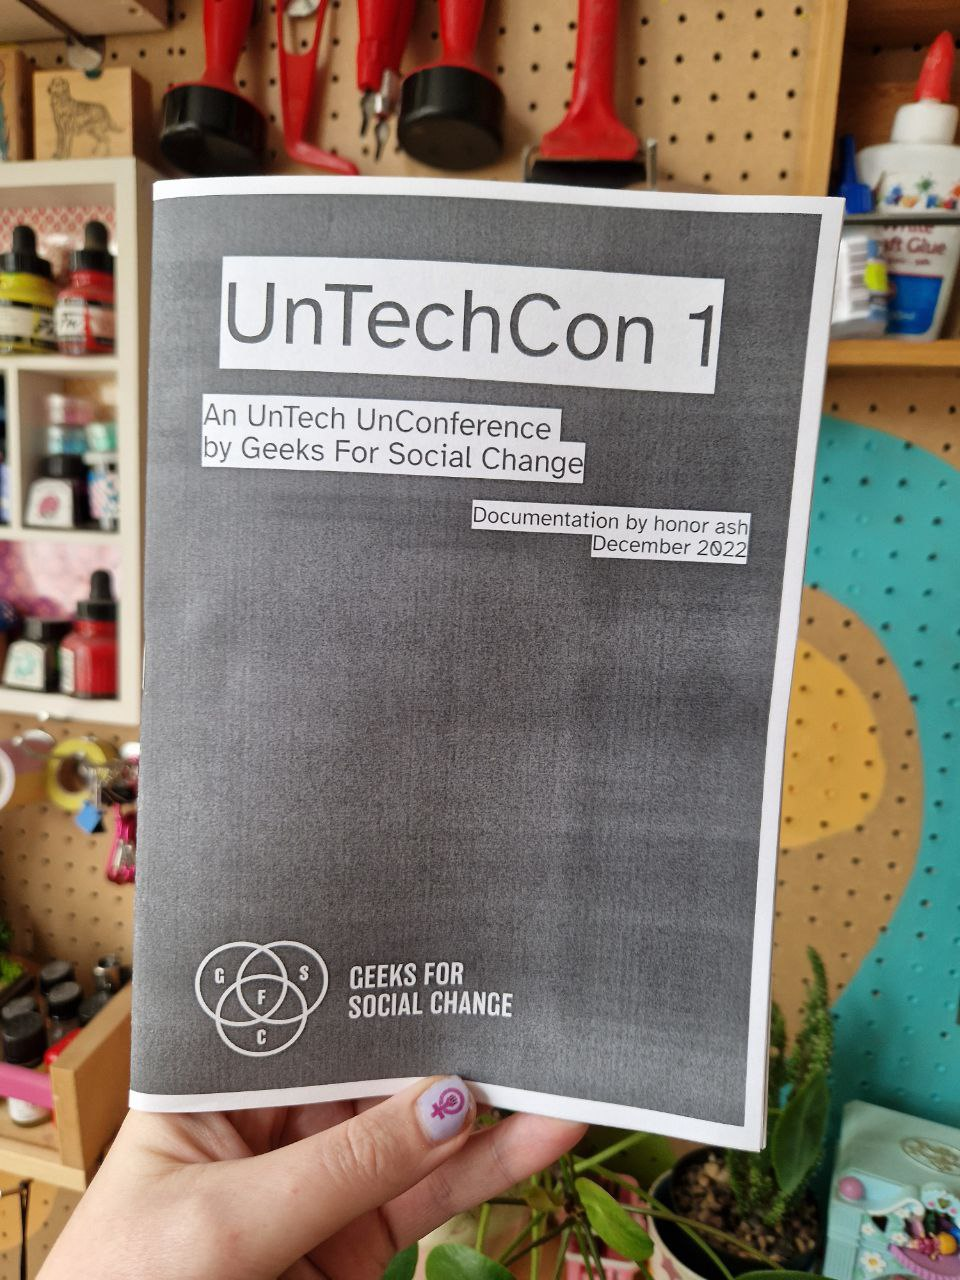 Someone with painted nails holding a photocopied version of the UnTechCon 1 documentation zine